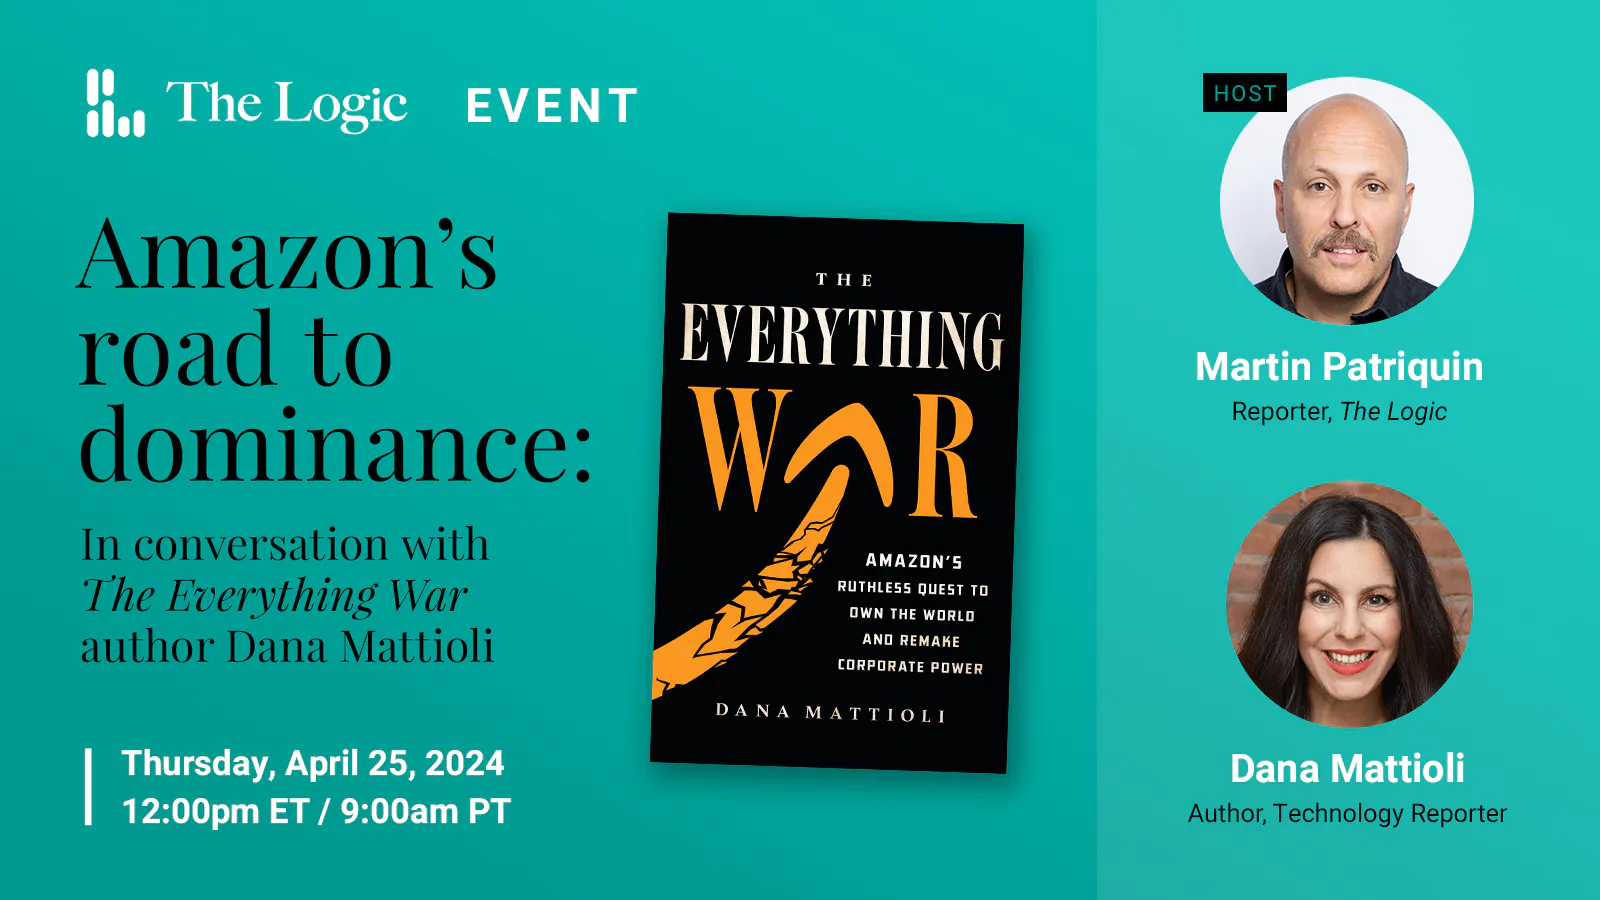 Amazon’s road to dominance: In conversation with “The Everything War” author Dana Mattioli event cover photo